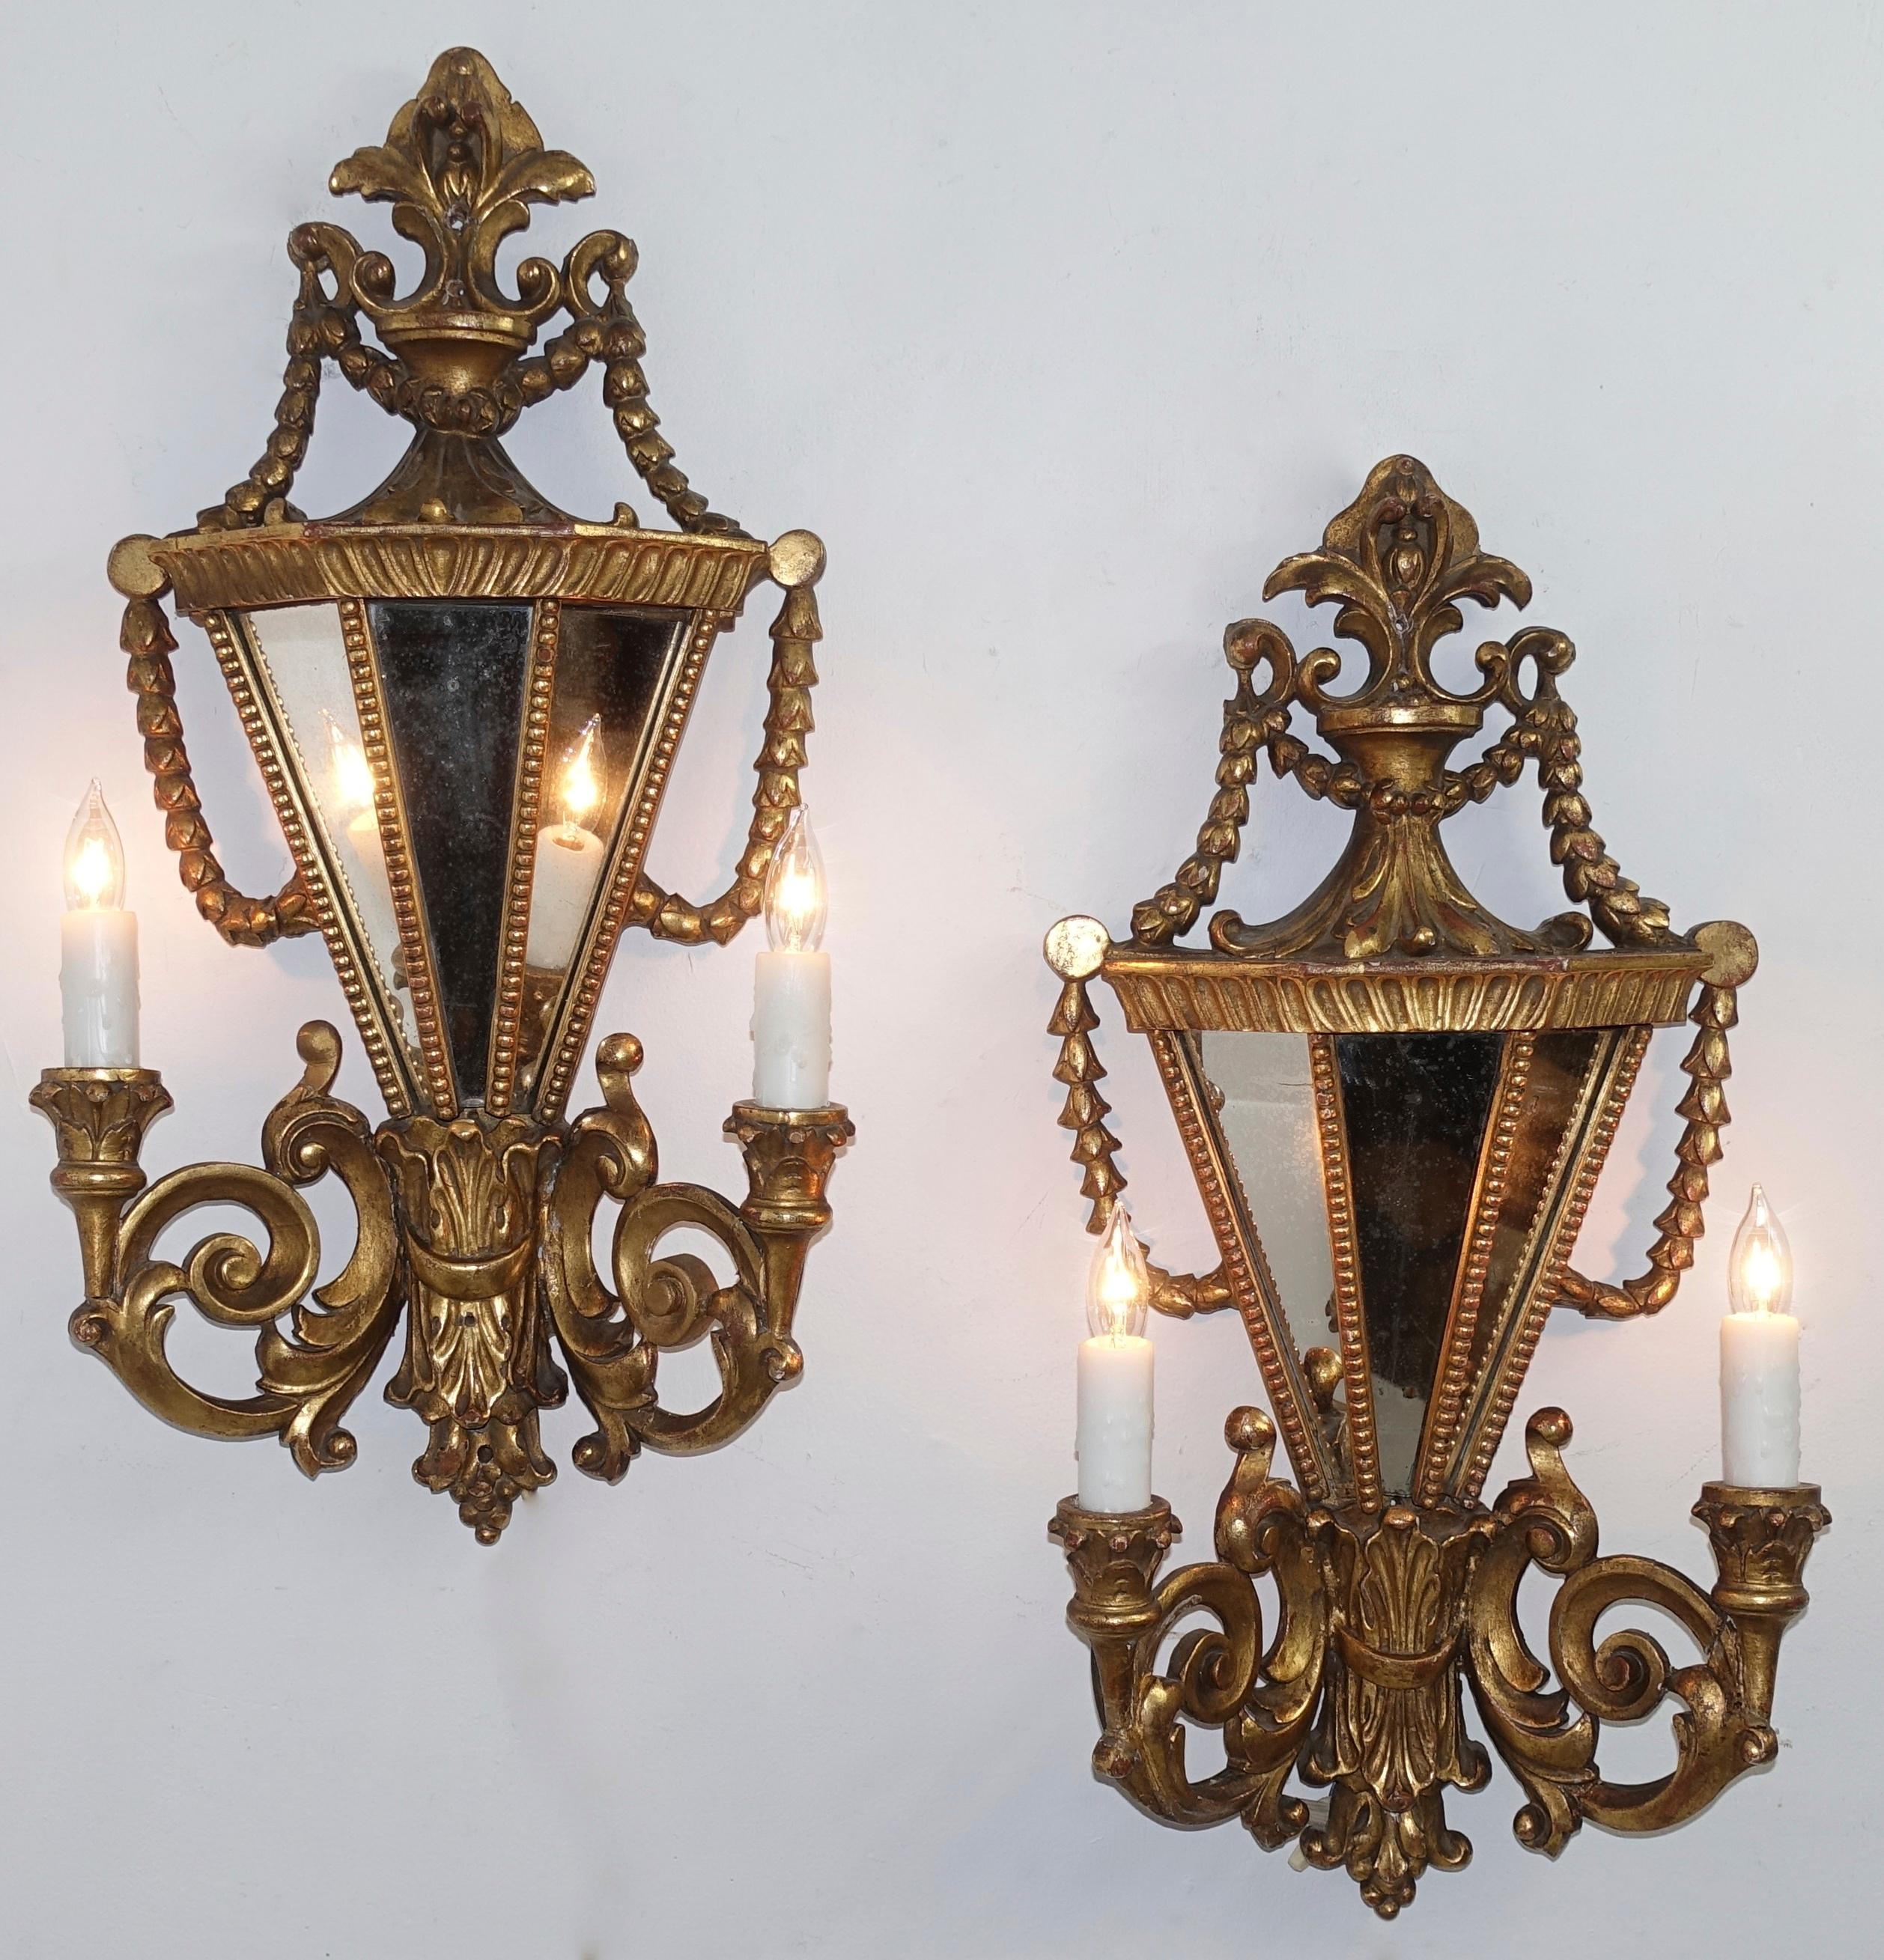 A pair of Italian two-arm and light giltwood and mirror wall sconces in the Baroque style,

early 20th century, Italy.